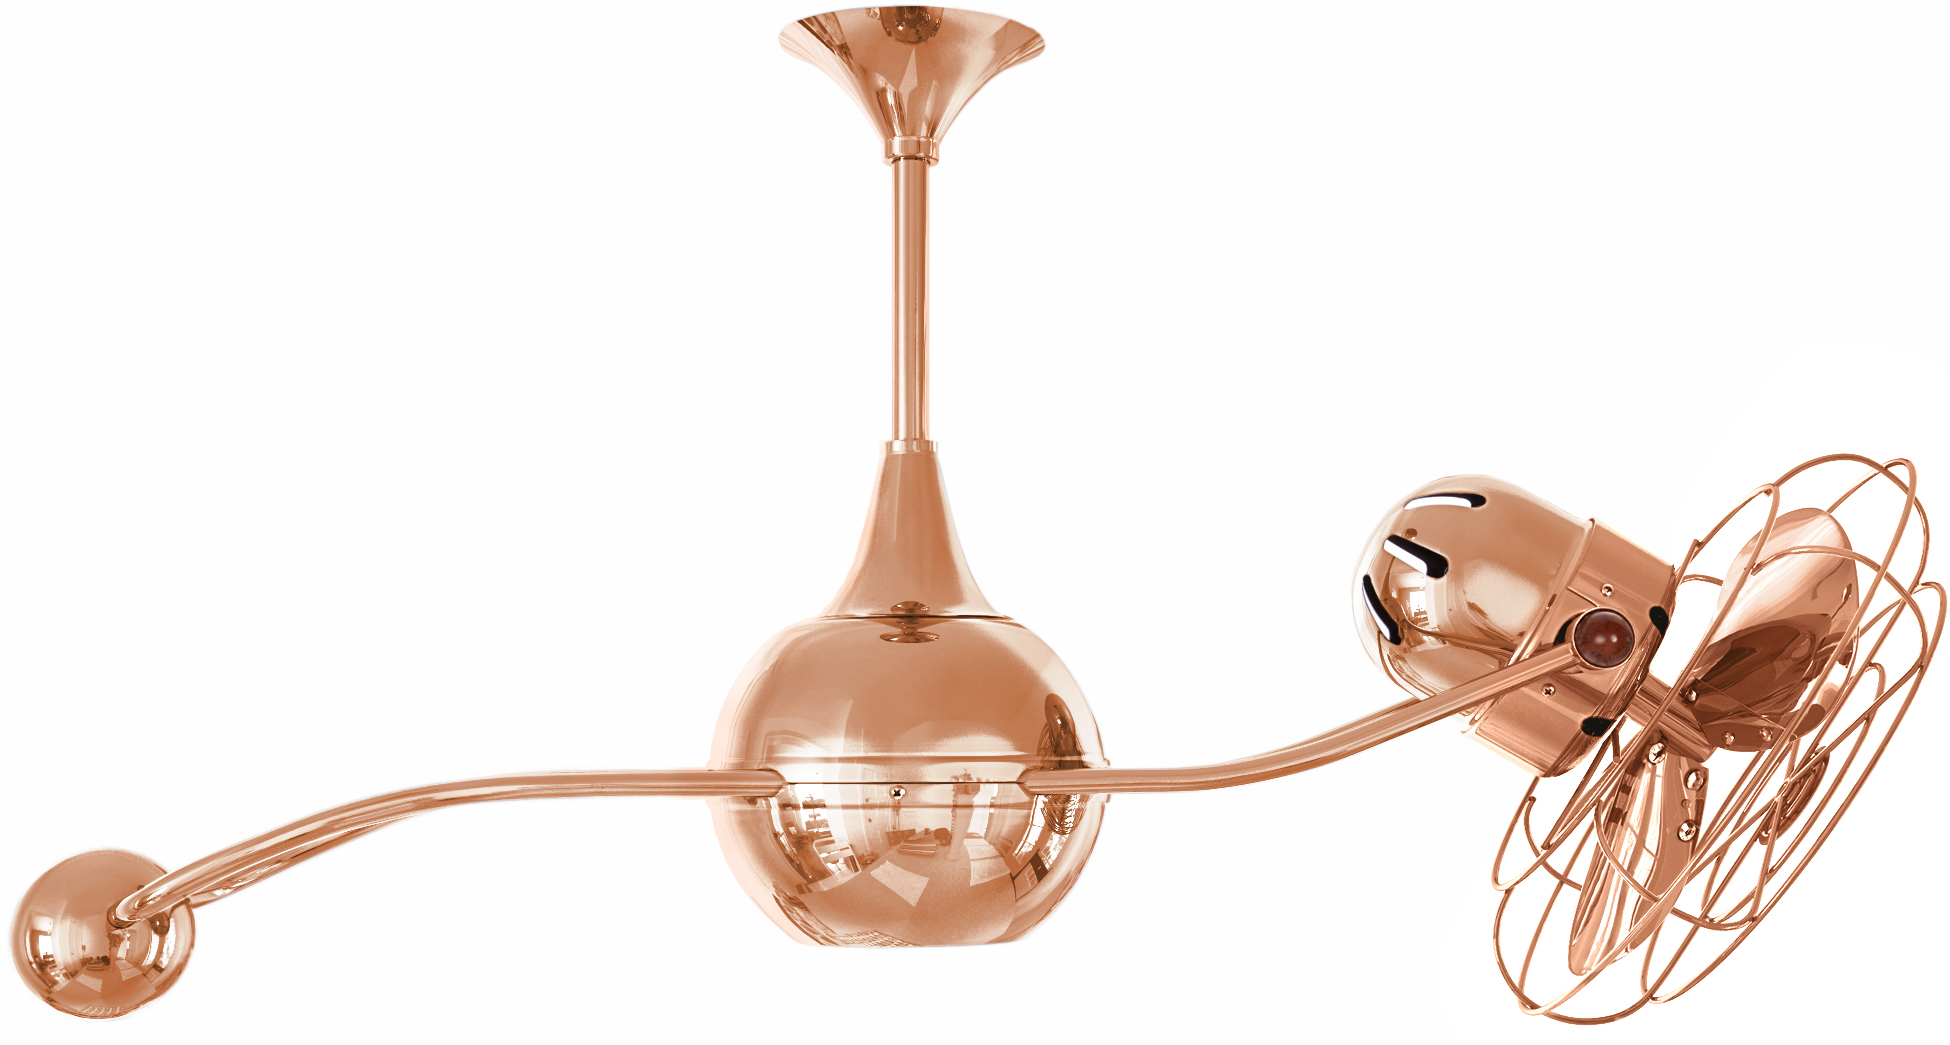 Brisa 2000 ceiling fan in polished copper finish with metal blades in decorative cage made by Matthews Fan Company.